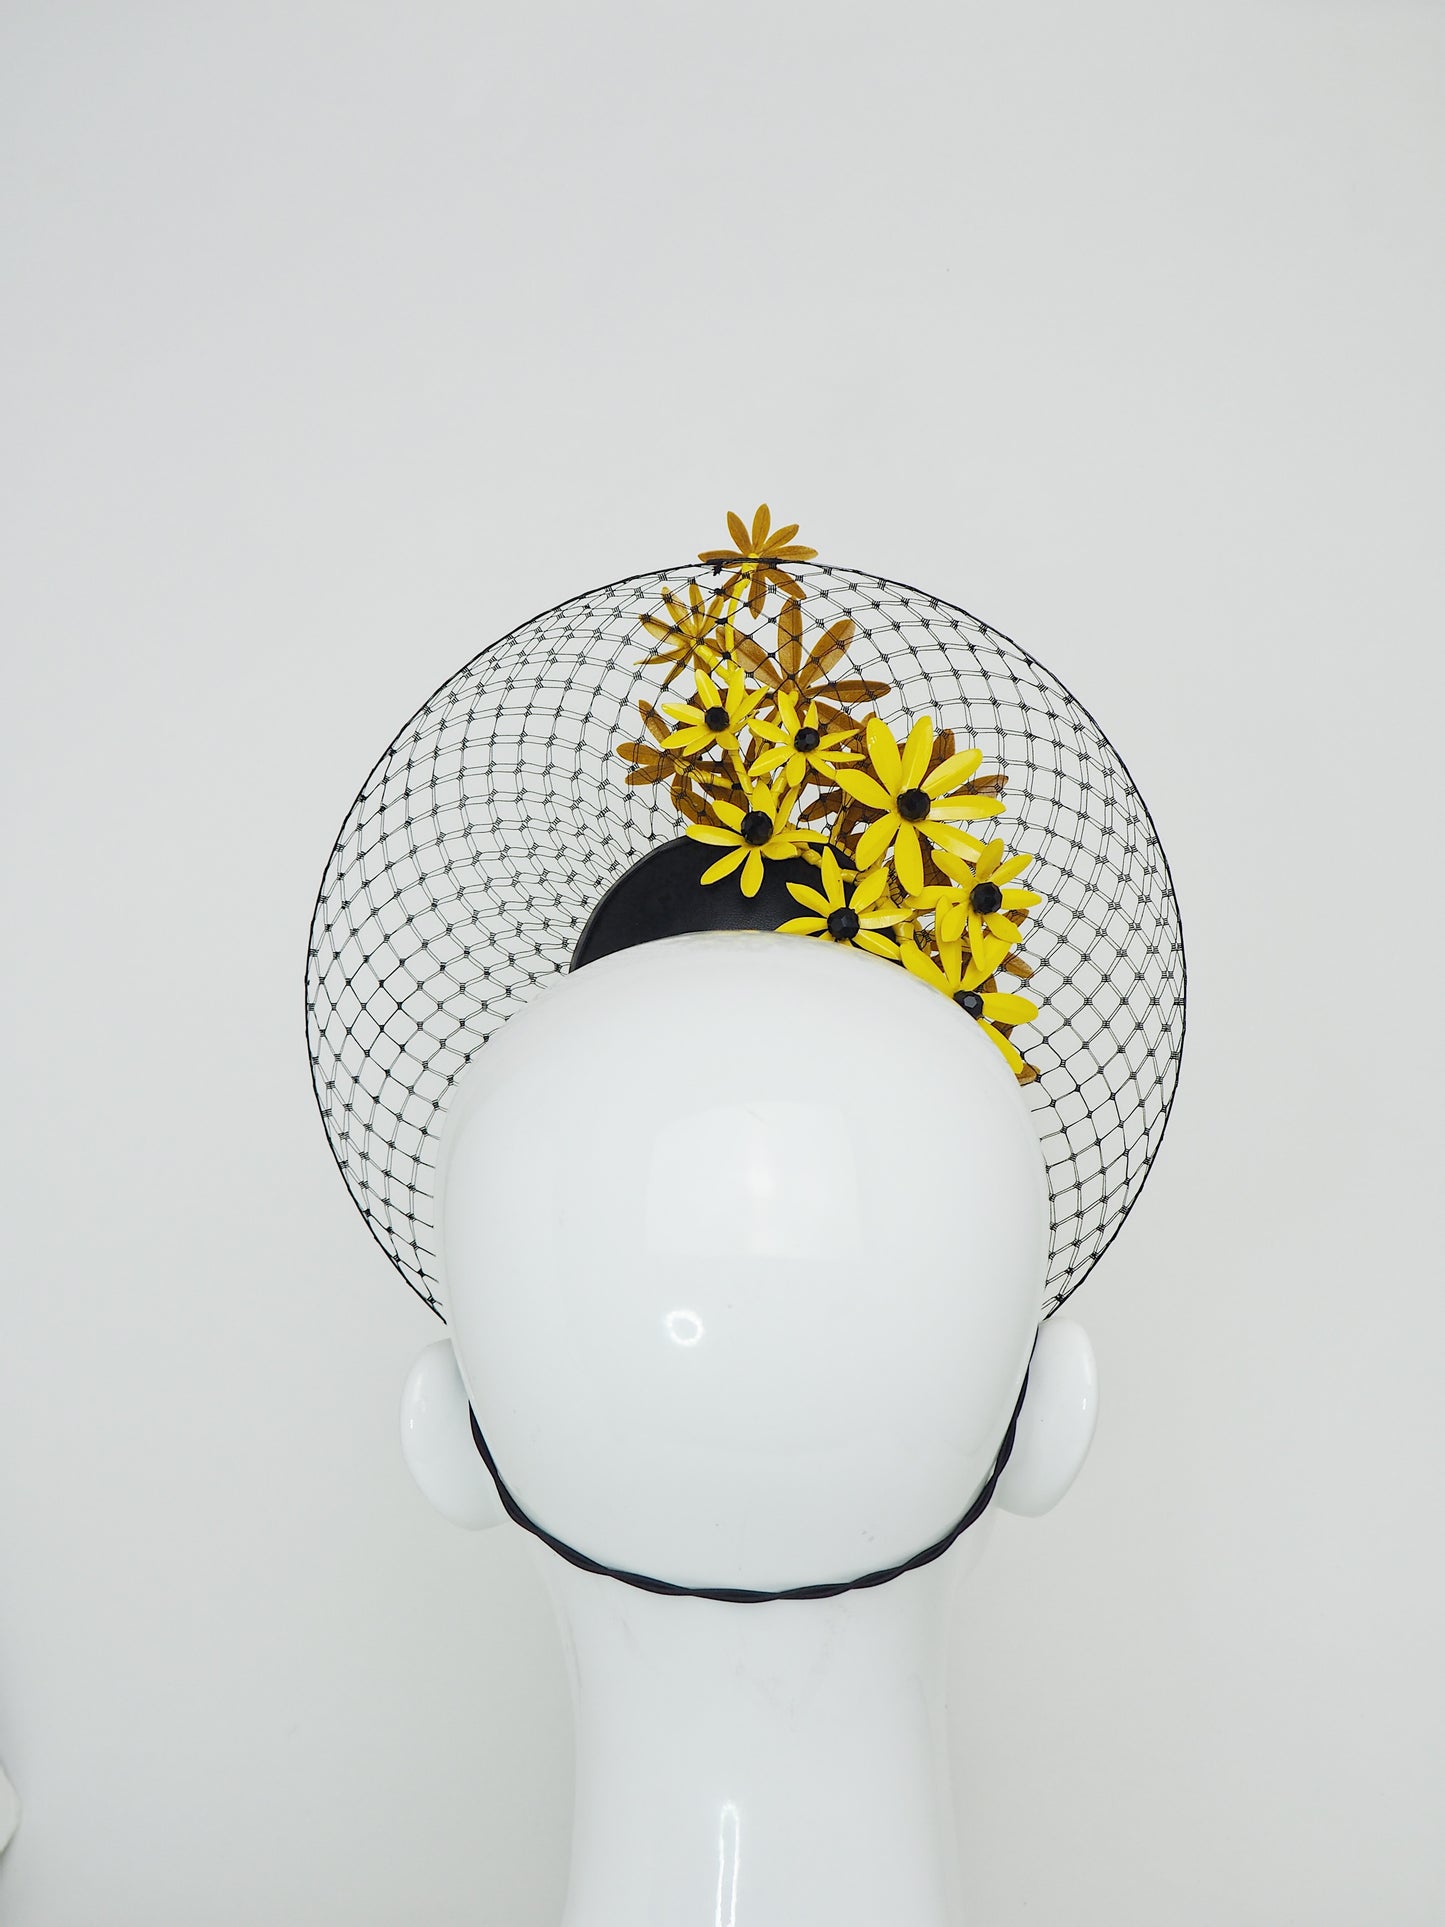 Gloriosa Daisies - Patent yellow leather percher with Gloriosa Daisies and a floating wired veil